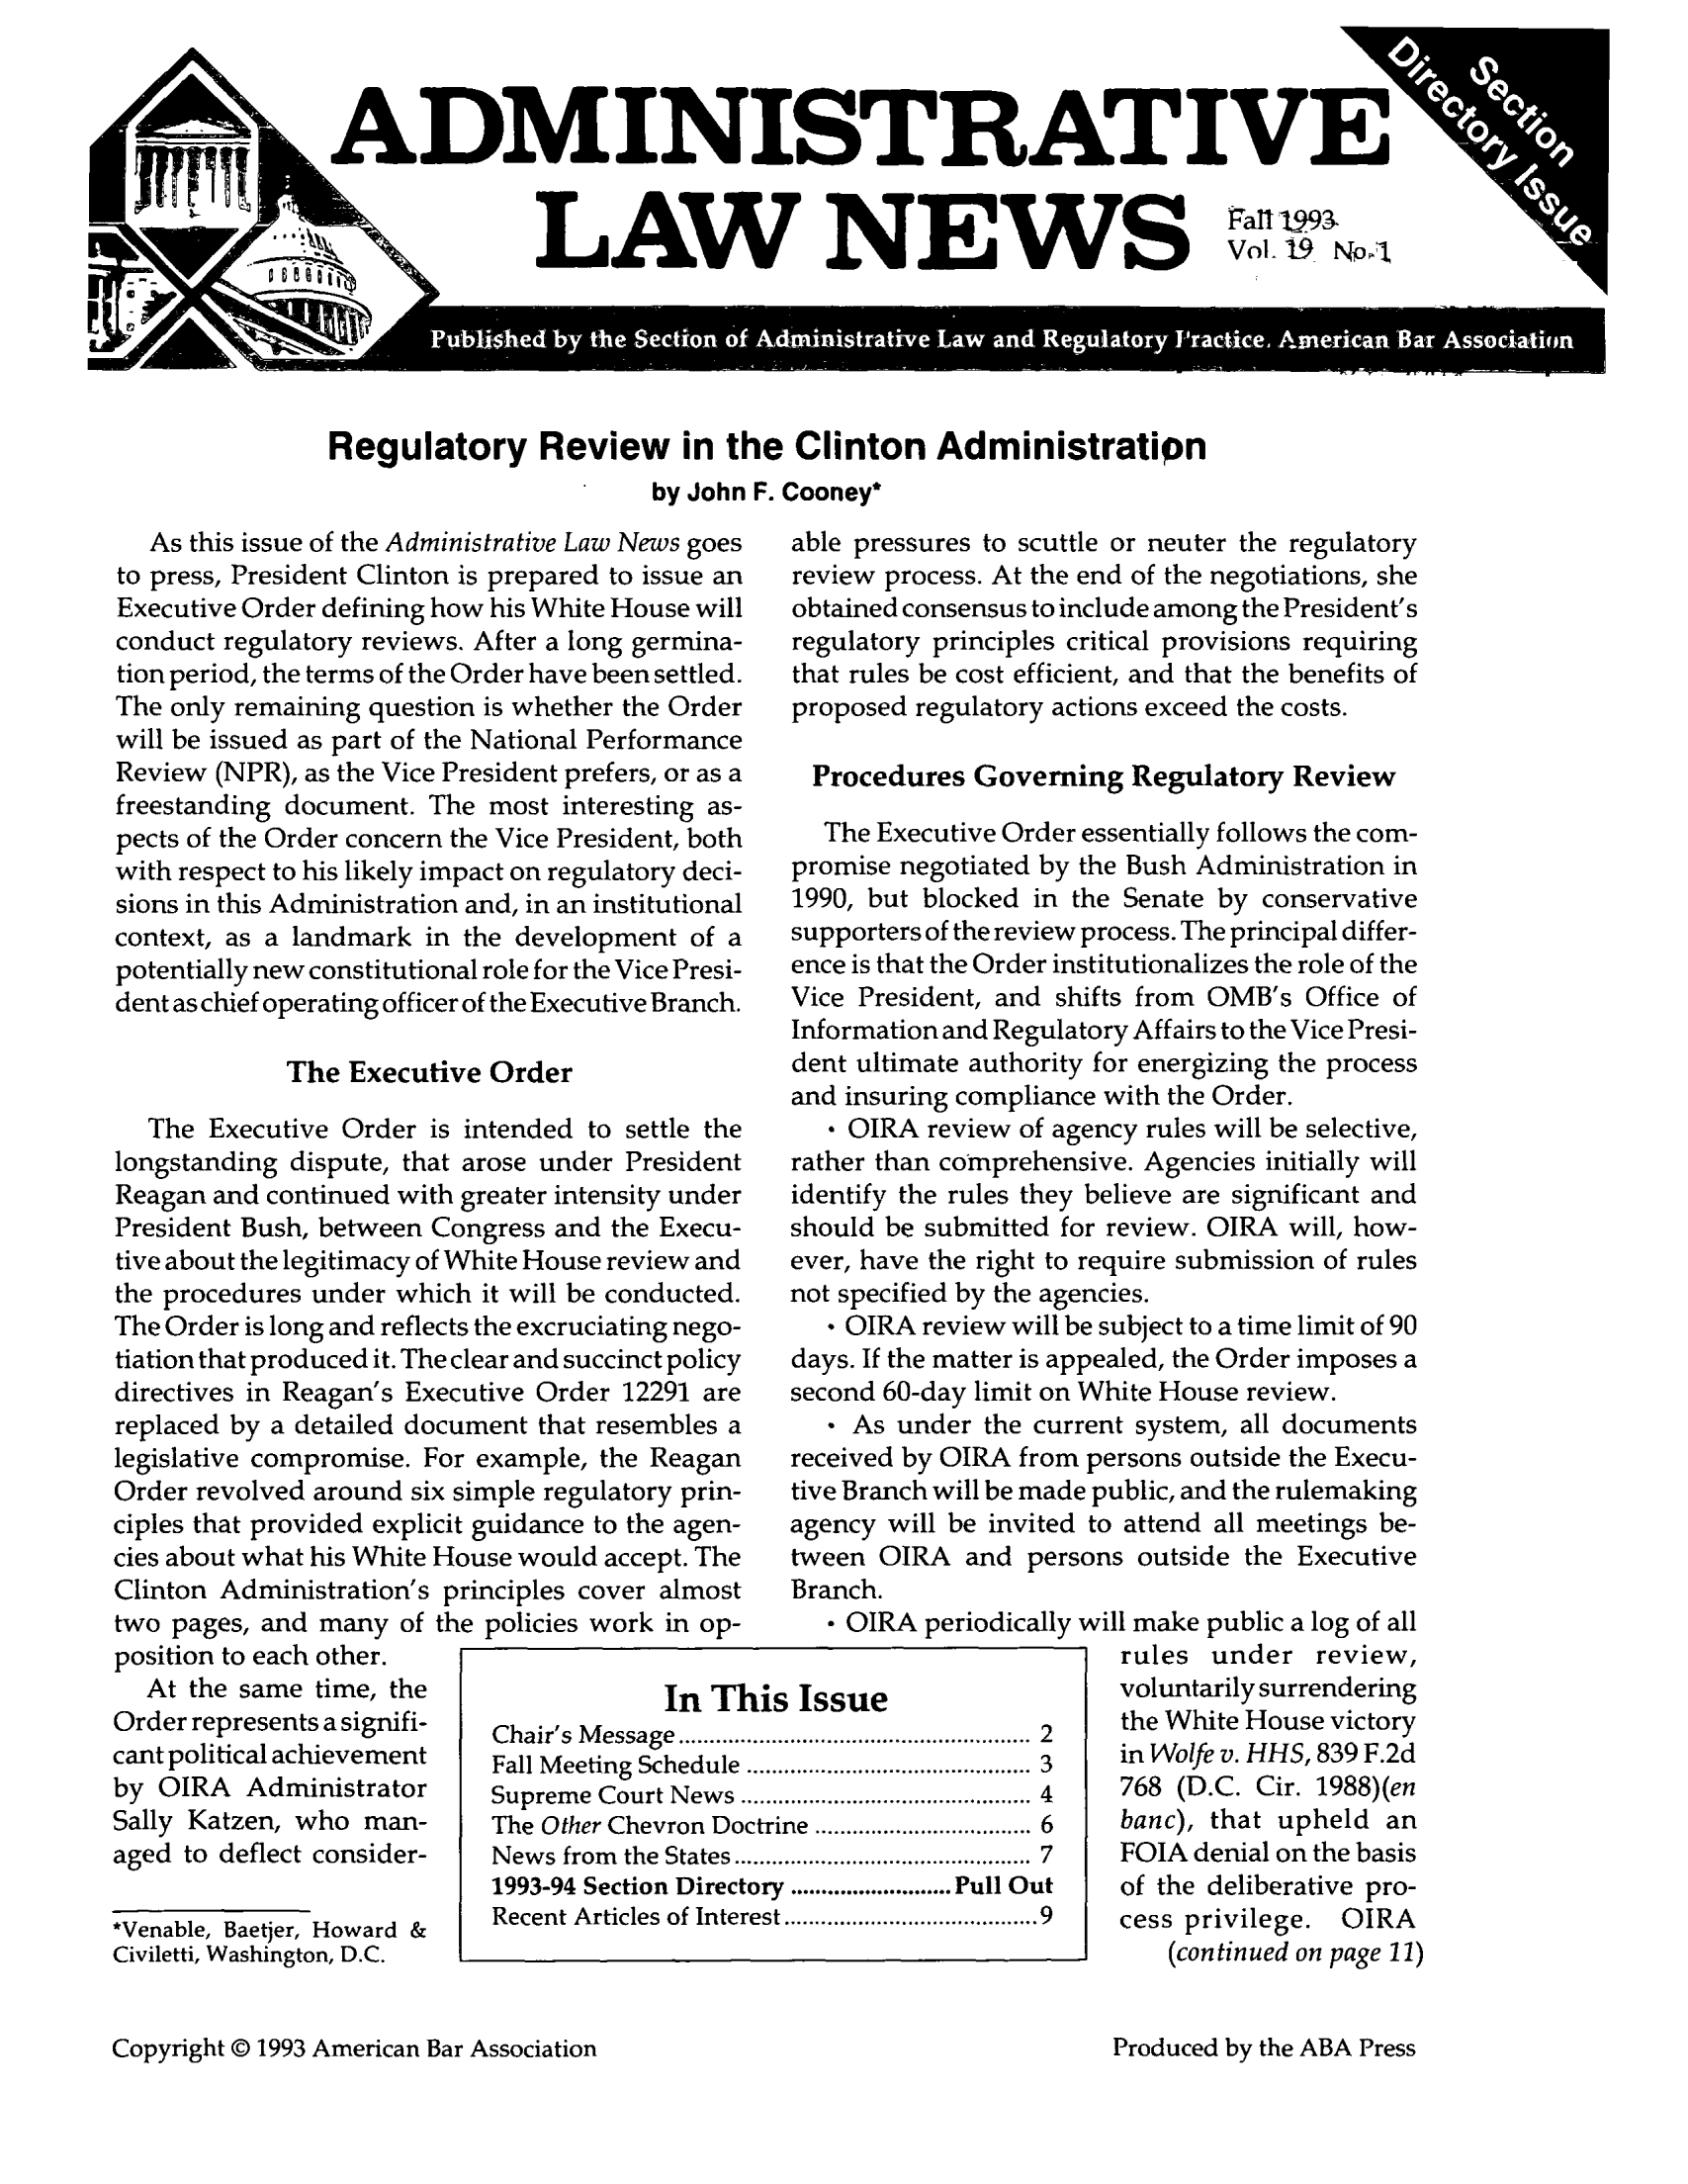 handle is hein.journals/admreln19 and id is 1 raw text is: DMINISTRATIVE
r    LAW NEWSV1I

Regulatory Review in the Clinton Administratipn
by John F. Cooney*

As this issue of the Administrative Law News goes
to press, President Clinton is prepared to issue an
Executive Order defining how his White House will
conduct regulatory reviews. After a long germina-
tion period, the terms of the Order have been settled.
The only remaining question is whether the Order
will be issued as part of the National Performance
Review (NPR), as the Vice President prefers, or as a
freestanding document. The most interesting as-
pects of the Order concern the Vice President, both
with respect to his likely impact on regulatory deci-
sions in this Administration and, in an institutional
context, as a landmark in the development of a
potentially new constitutional role for the Vice Presi-
dent as chief operating officer of the Executive Branch.
The Executive Order
The Executive Order is intended to settle the
longstanding dispute, that arose under President
Reagan and continued with greater intensity under
President Bush, between Congress and the Execu-
tive about the legitimacy of White House review and
the procedures under which it will be conducted.
The Order is long and reflects the excruciating nego-
tiation that produced it. The clear and succinct policy
directives in Reagan's Executive Order 12291 are
replaced by a detailed document that resembles a
legislative compromise. For example, the Reagan
Order revolved around six simple regulatory prin-
ciples that provided explicit guidance to the agen-
cies about what his White House would accept. The
Clinton Administration's principles cover almost
two pages, and many of the policies work in op-
position to each other.
At the same time, the                In TI
Order represents a signifi-  Chair's Message ............
cant political achievement  Fall Meeting Schedule.
by OIRA Administrator      Supreme Court News..
Sally Katzen, who man-     The Other Chevron Do(
aged to deflect consider-  News from the States...
1993-94 Section Direct,
*Venable, Baetjer, Howard & Recent Articles of Inter
Civiletti, Washington, D.C.

able pressures to scuttle or neuter the regulatory
review process. At the end of the negotiations, she
obtained consensus to include among the President's
regulatory principles critical provisions requiring
that rules be cost efficient, and that the benefits of
proposed regulatory actions exceed the costs.
Procedures Governing Regulatory Review
The Executive Order essentially follows the com-
promise negotiated by the Bush Administration in
1990, but blocked in the Senate by conservative
supporters of the review process. The principal differ-
ence is that the Order institutionalizes the role of the
Vice President, and shifts from OMB's Office of
Information and Regulatory Affairs to the Vice Presi-
dent ultimate authority for energizing the process
and insuring compliance with the Order.
* OIRA review of agency rules will be selective,
rather than comprehensive. Agencies initially will
identify the rules they believe are significant and
should be submitted for review. OIRA will, how-
ever, have the right to require submission of rules
not specified by the agencies.
 OIRA review will be subject to a time limit of 90
days. If the matter is appealed, the Order imposes a
second 60-day limit on White House review.
 As under the current system, all documents
received by OIRA from persons outside the Execu-
tive Branch will be made public, and the rulemaking
agency will be invited to attend all meetings be-
tween OIRA and persons outside the Executive
Branch.
- OIRA periodically will make public a log of all
rules under review,
Issue                    voluntarily surrendering
.2                       the White House victory
.3                       in Wolfe v. HHS, 839 F.2d
........................................ 4  768  (D.C .  Cir.  1988)(en
tne ...............6    banc), that upheld an
..............*.......................... 7  FOIA  denial on  the  basis
.........Pull Out       of the deliberative pro-
.......................................9  cess  privilege.  OIRA
(continued on page 11)

Copyright © 1993 American Bar Association

11,
ctri
ory
'est

Produced by the ABA Press


